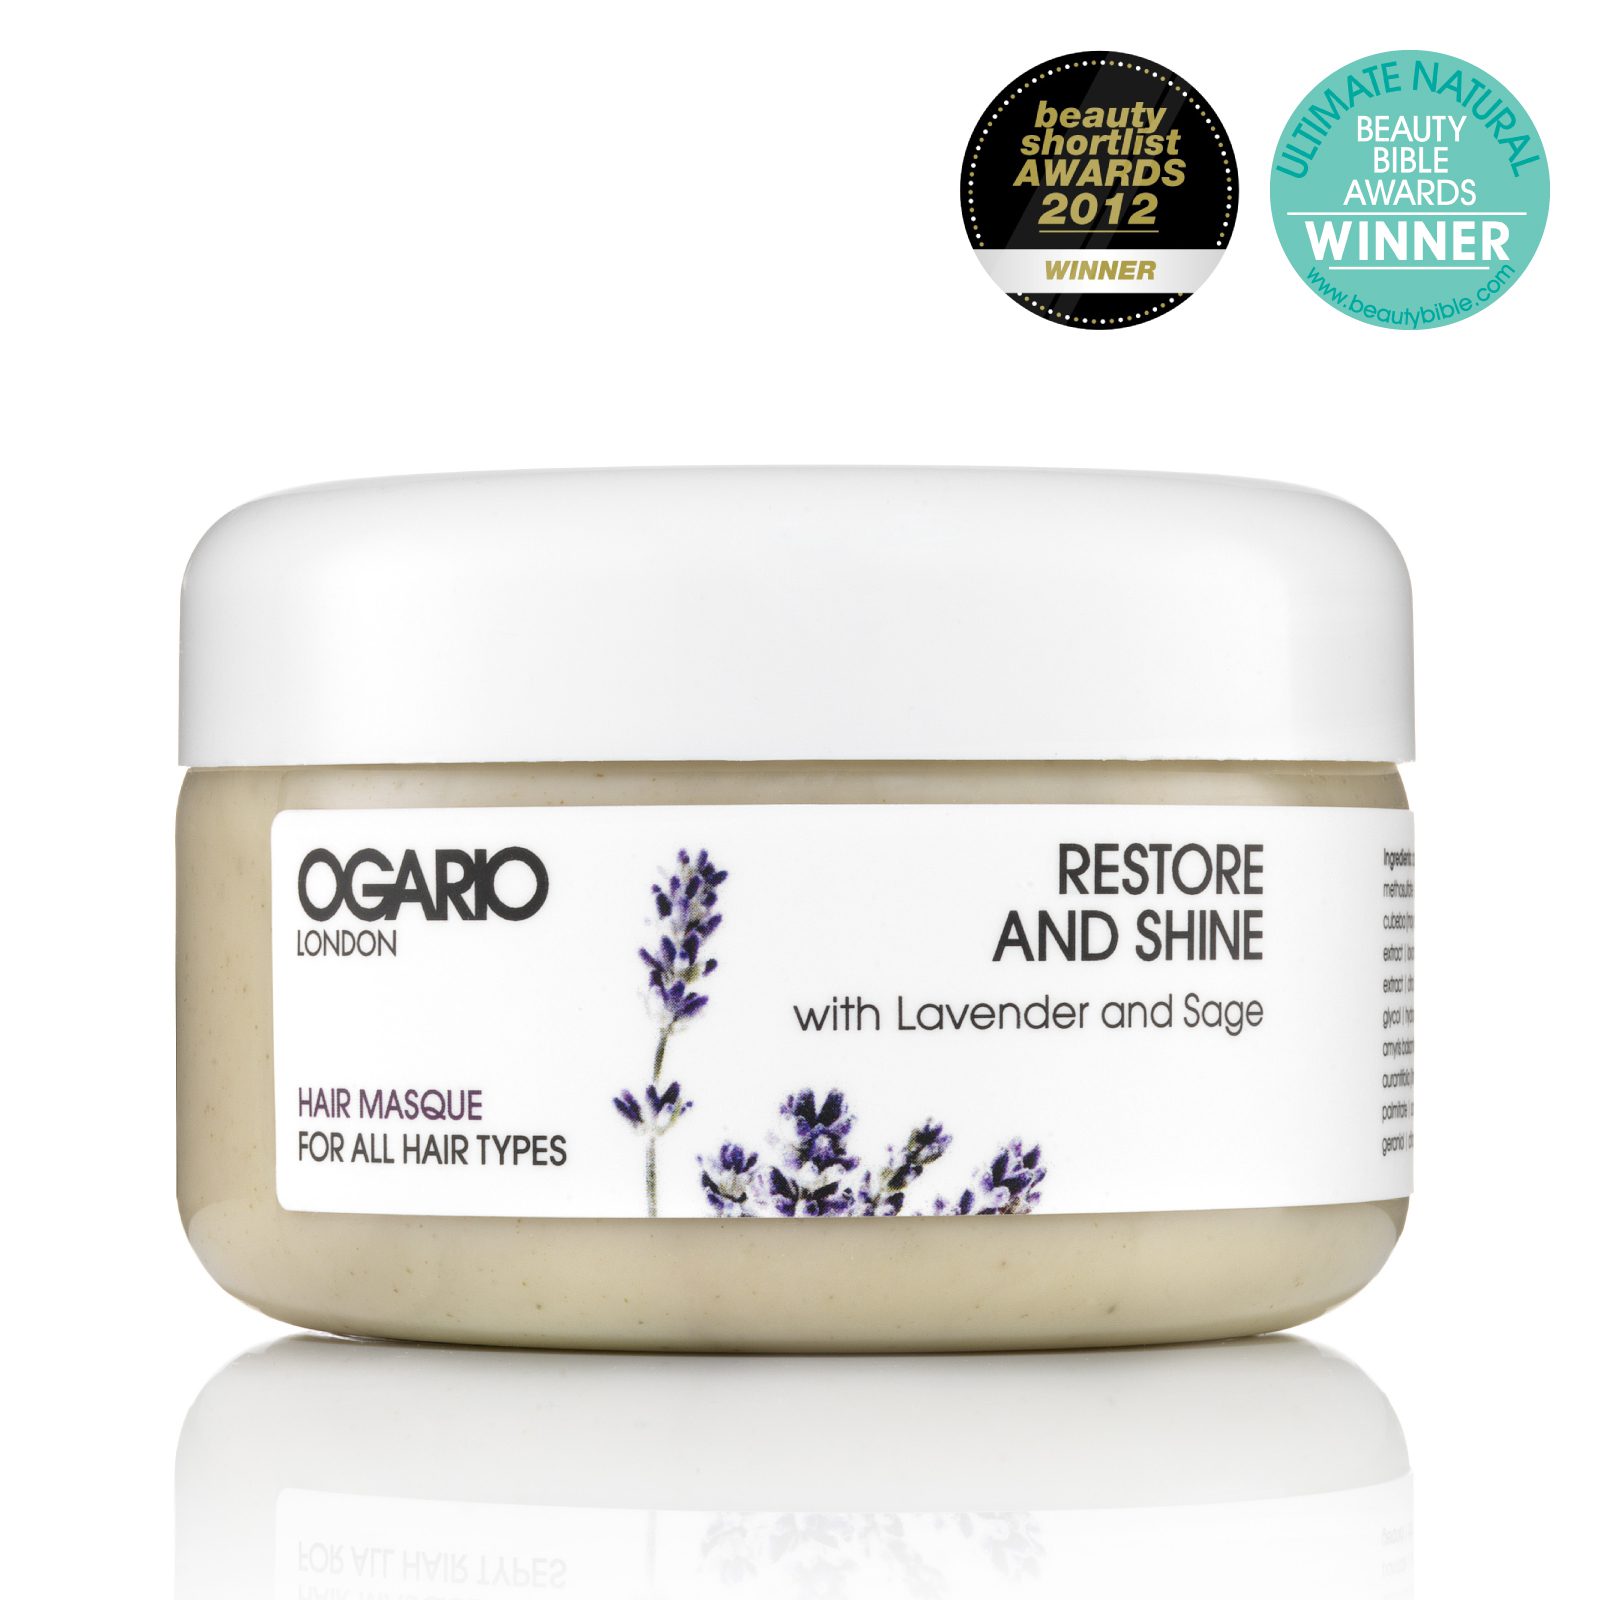 Restore and Shine Hair Masque; Best for adding volume to fine wavy or curly hair